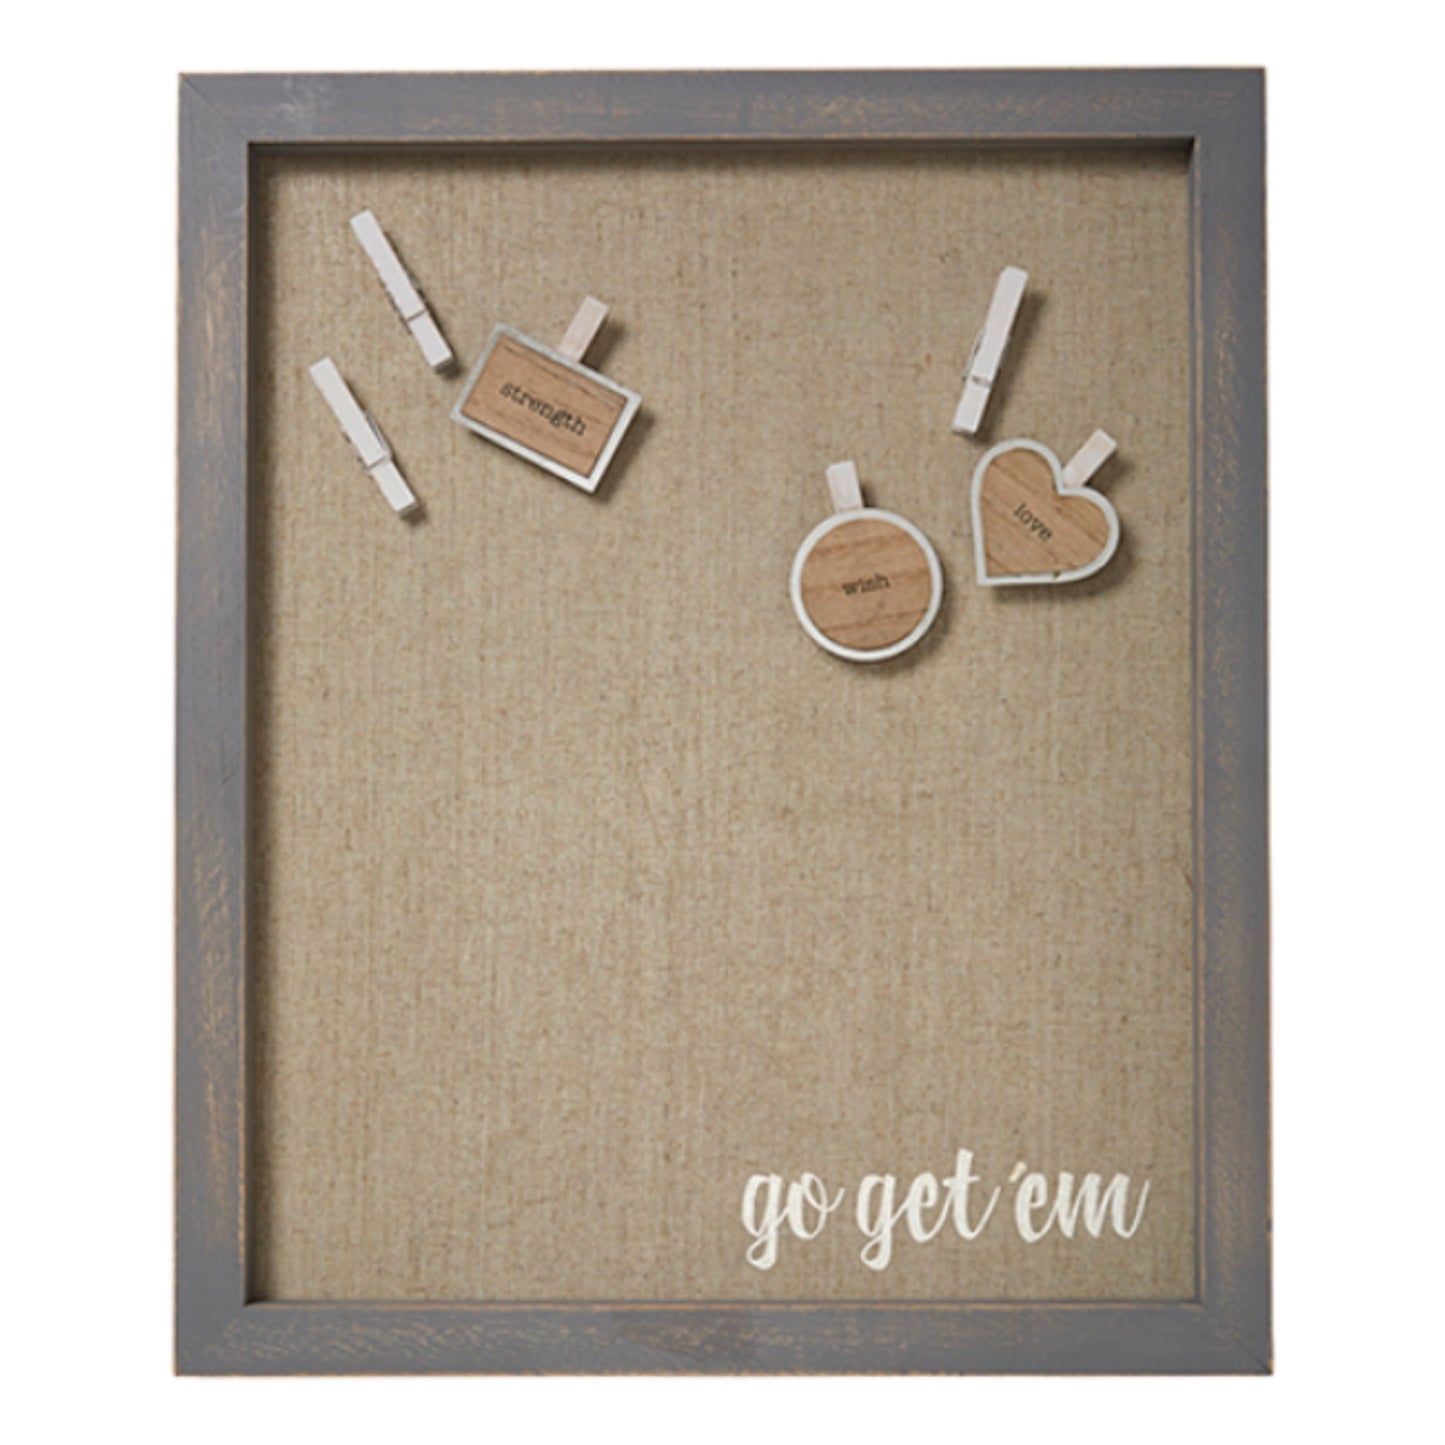 Magnet Board Fabric Framed Wall Art with Magnets - go get 'em (15x18) | Includes 6 magnets as shown... 3 clothespin magnets 3 inspirational magnets (strength, wish, love) | perfect organization for your kitchen or home office | INSIDE OUT | InsideOutCatalog.com